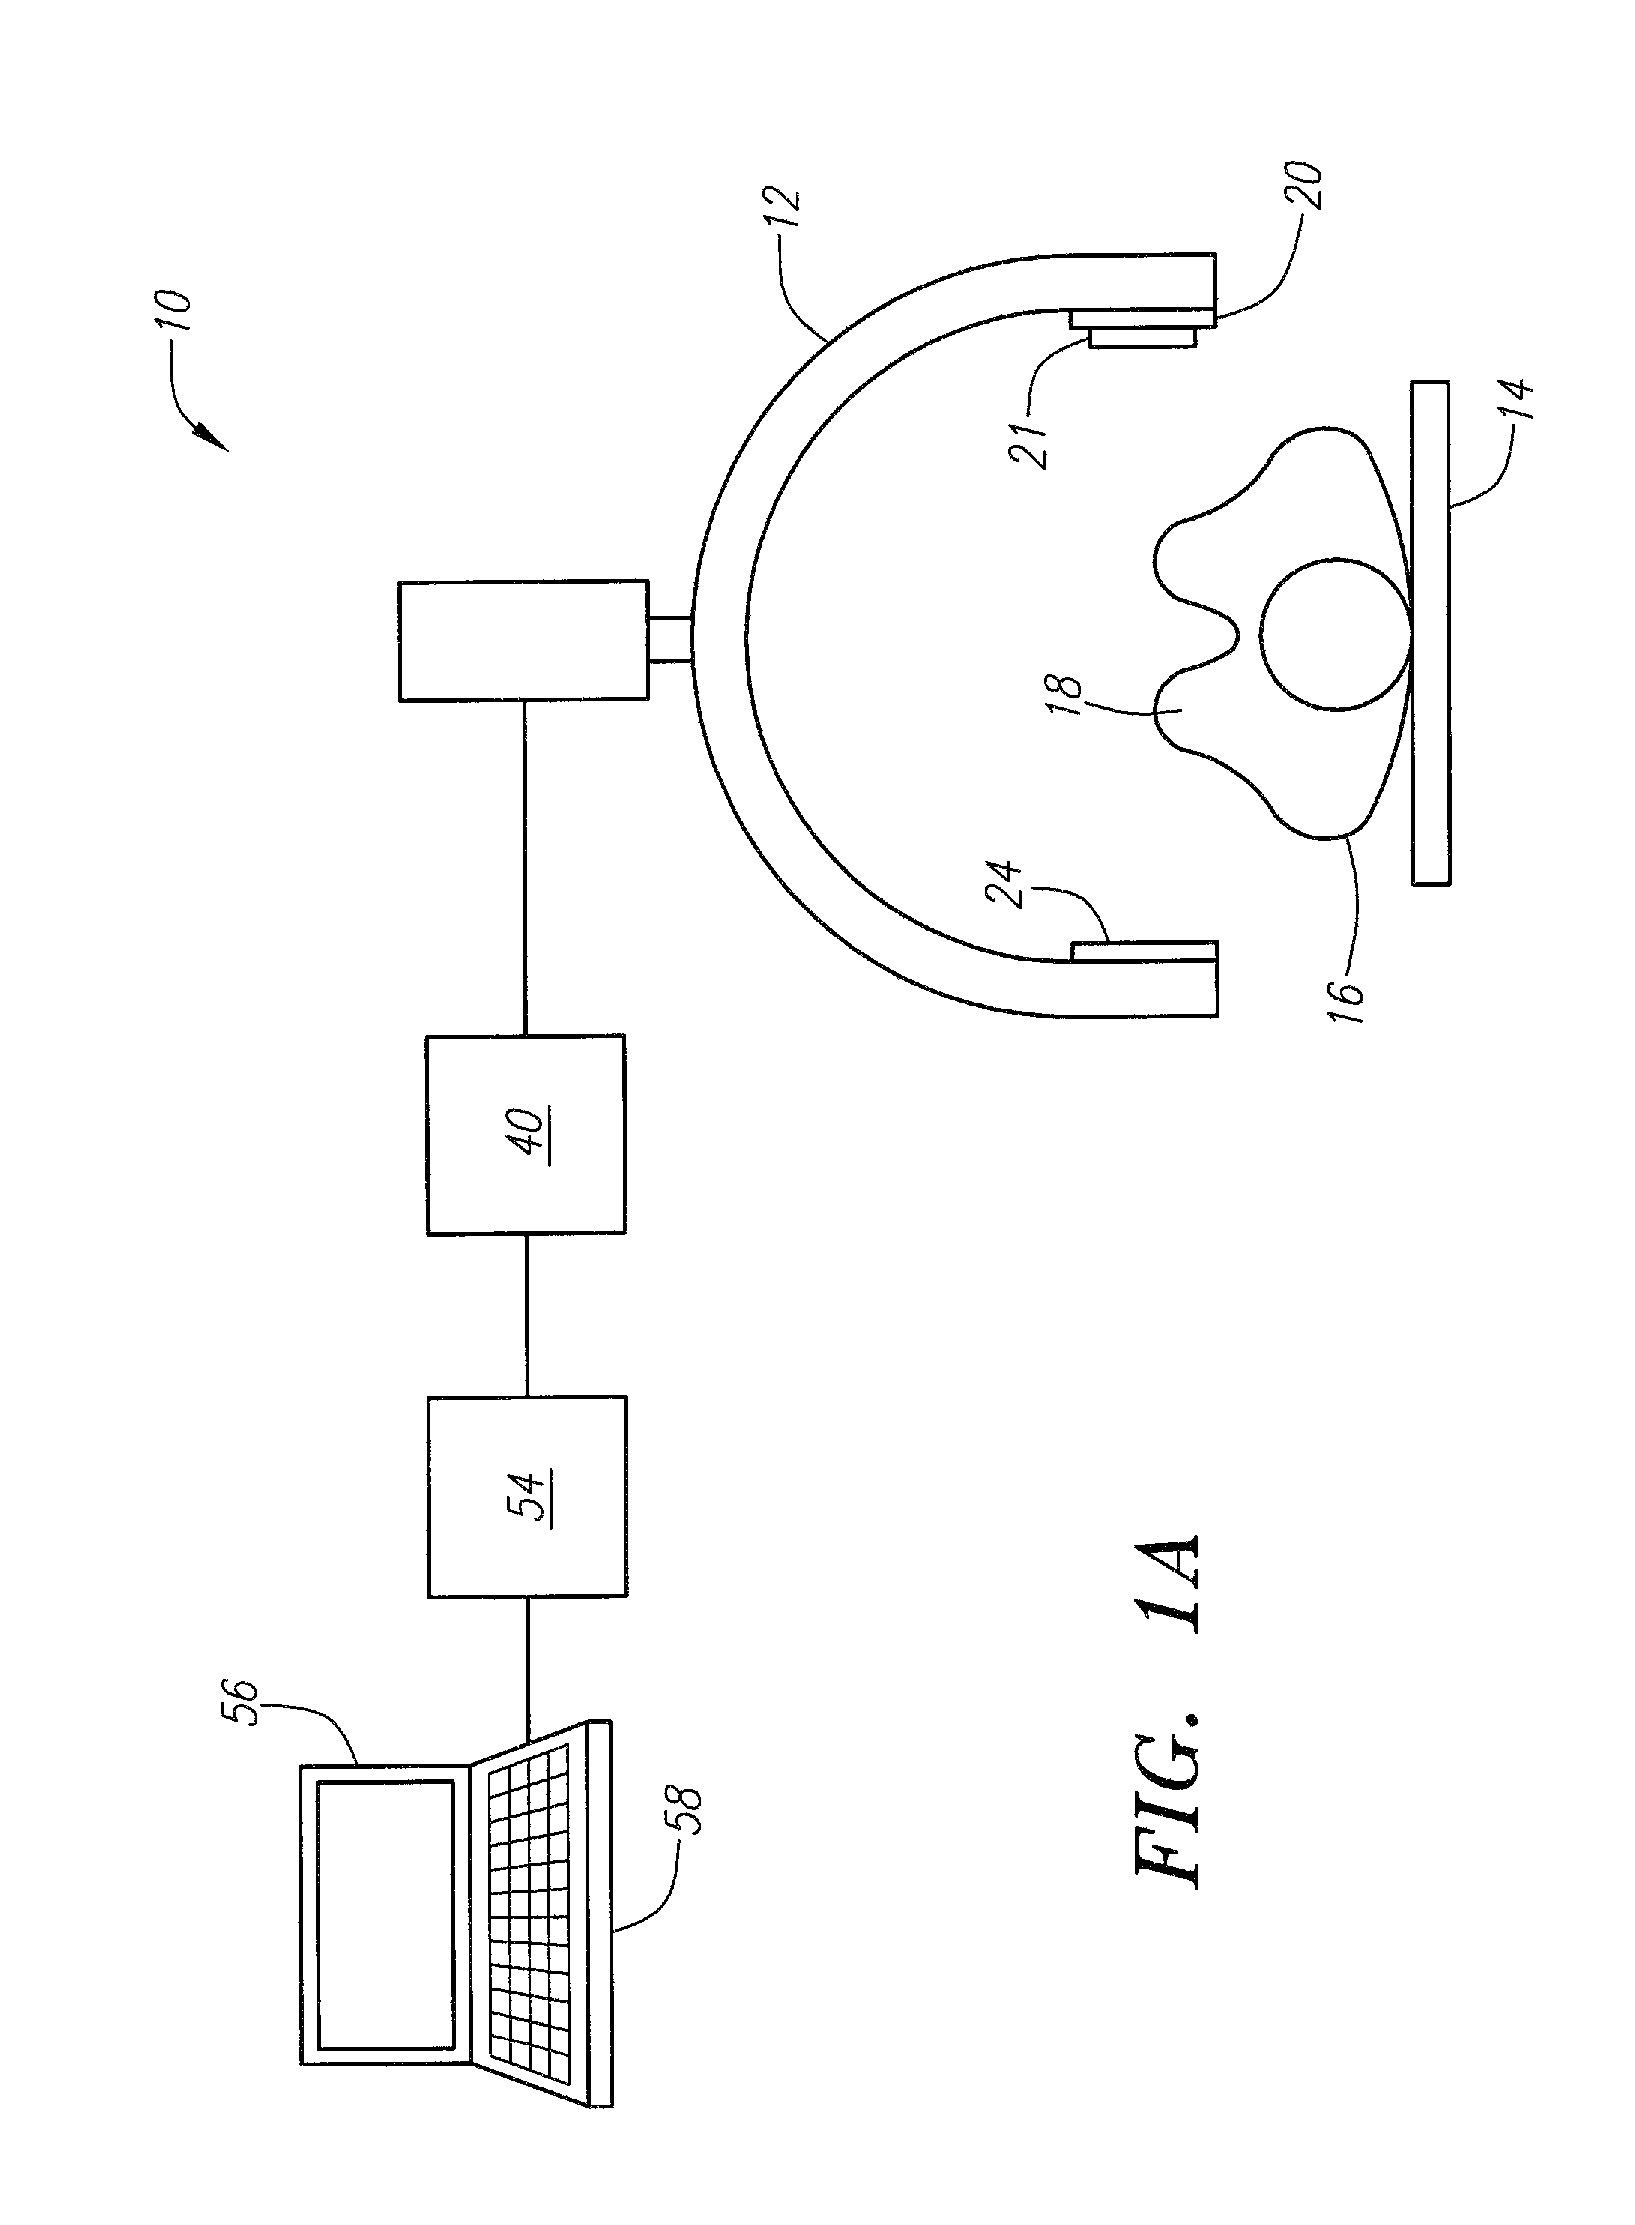 Systems and methods for functional imaging using contrast-enhanced multiple-energy computed tomography